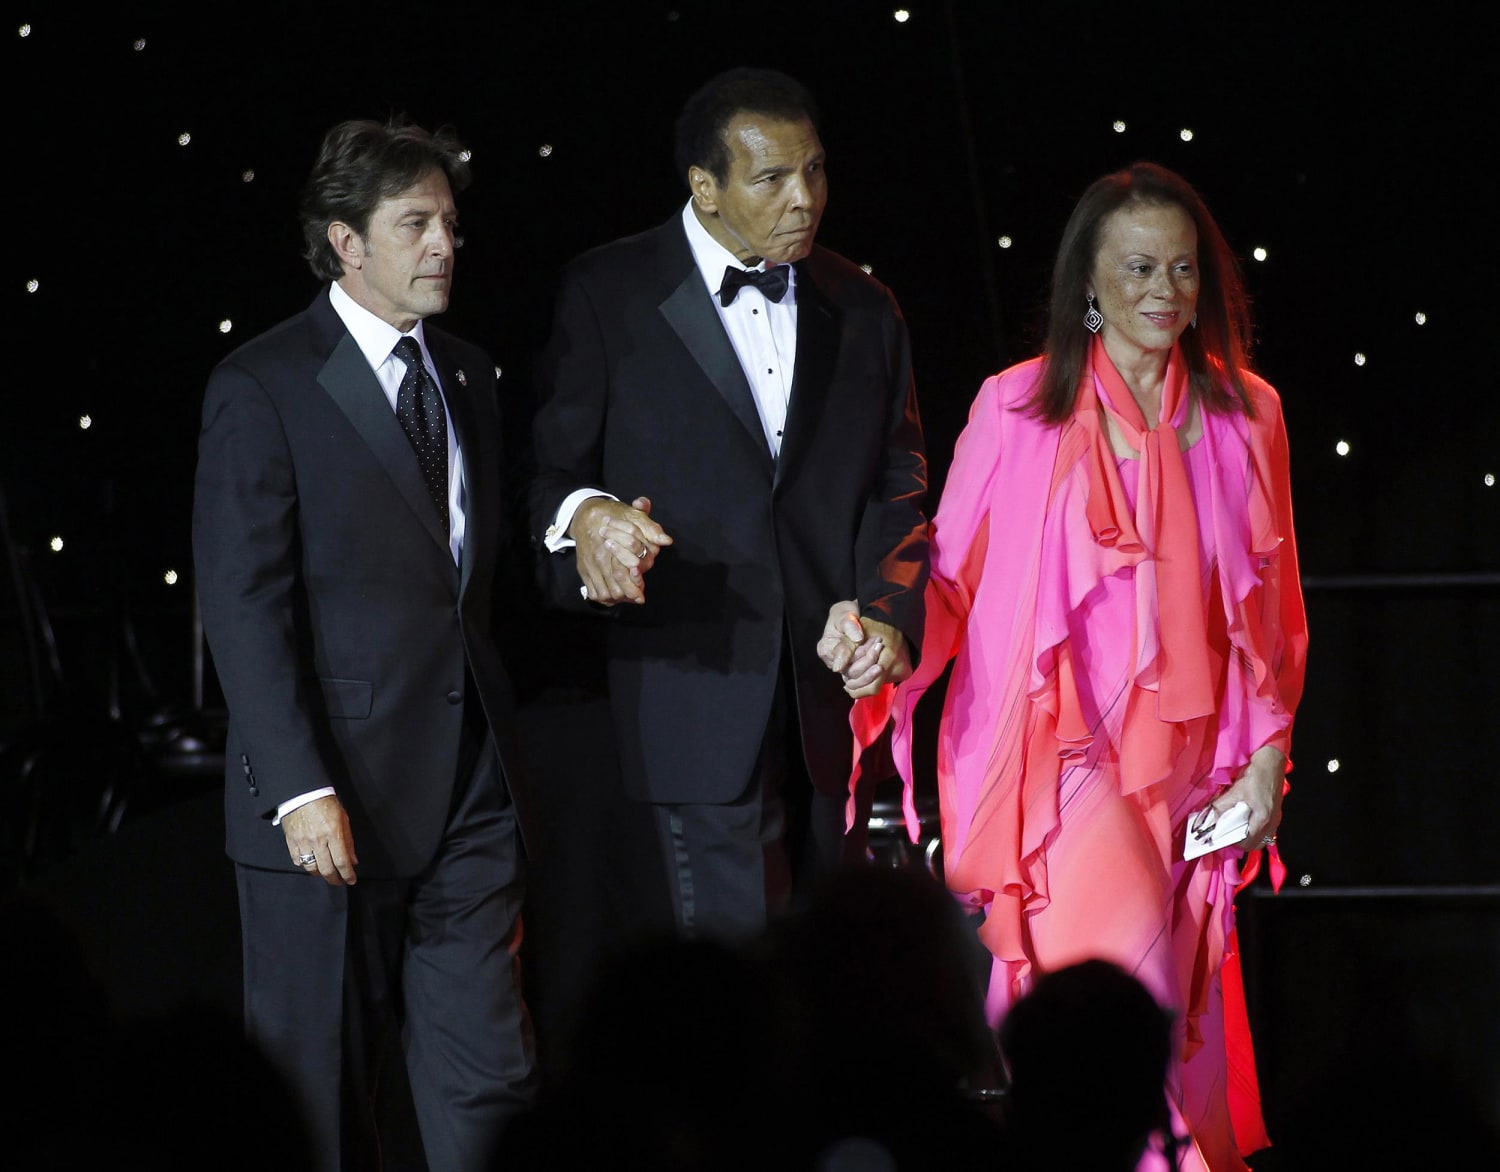 Image: Muhammed Ali is escorted on stage by his wife Lonnie Ali and a personal assistant during The Muhammad Ali Celebrity Fight Night Awards XIX in Phoenix